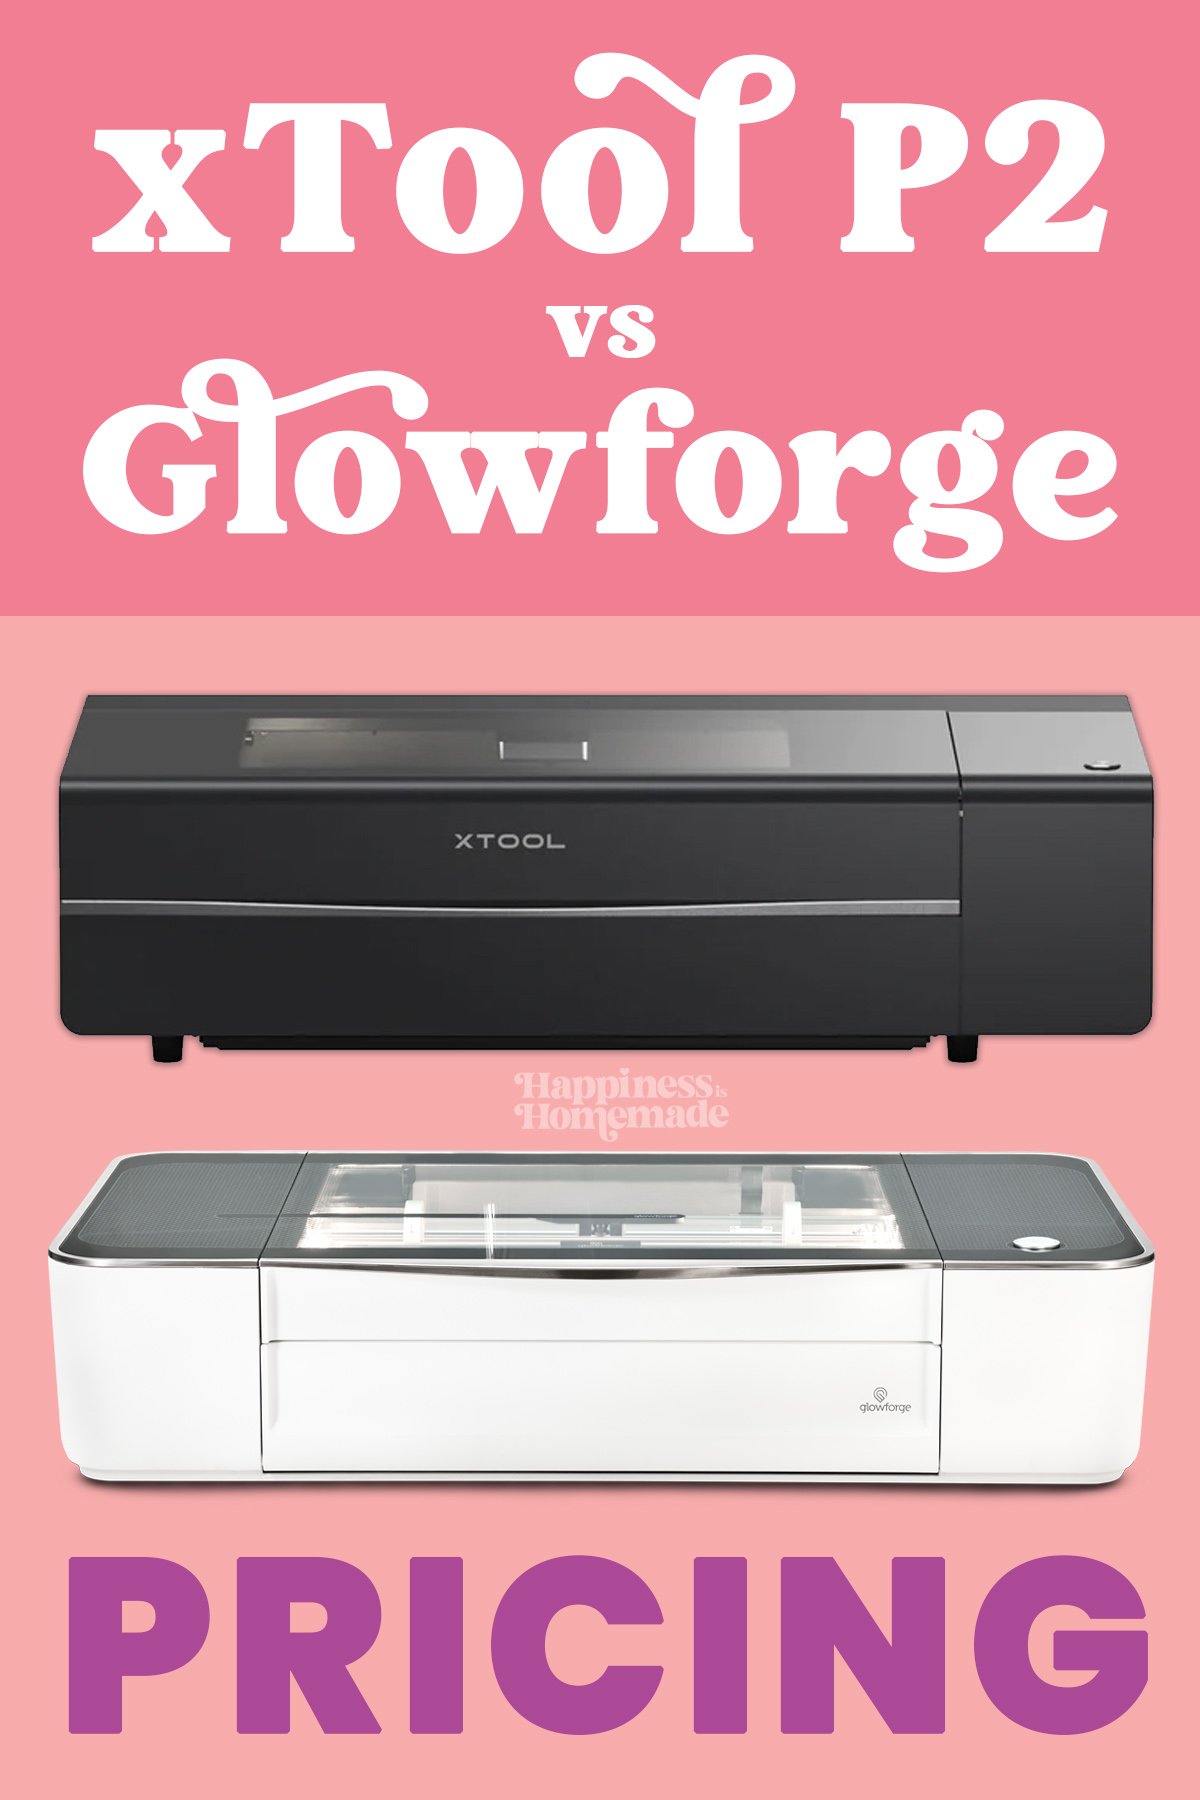 'xTool P2 vs Glowforge Pro - Pricing" graphic with images of both machines on coral background